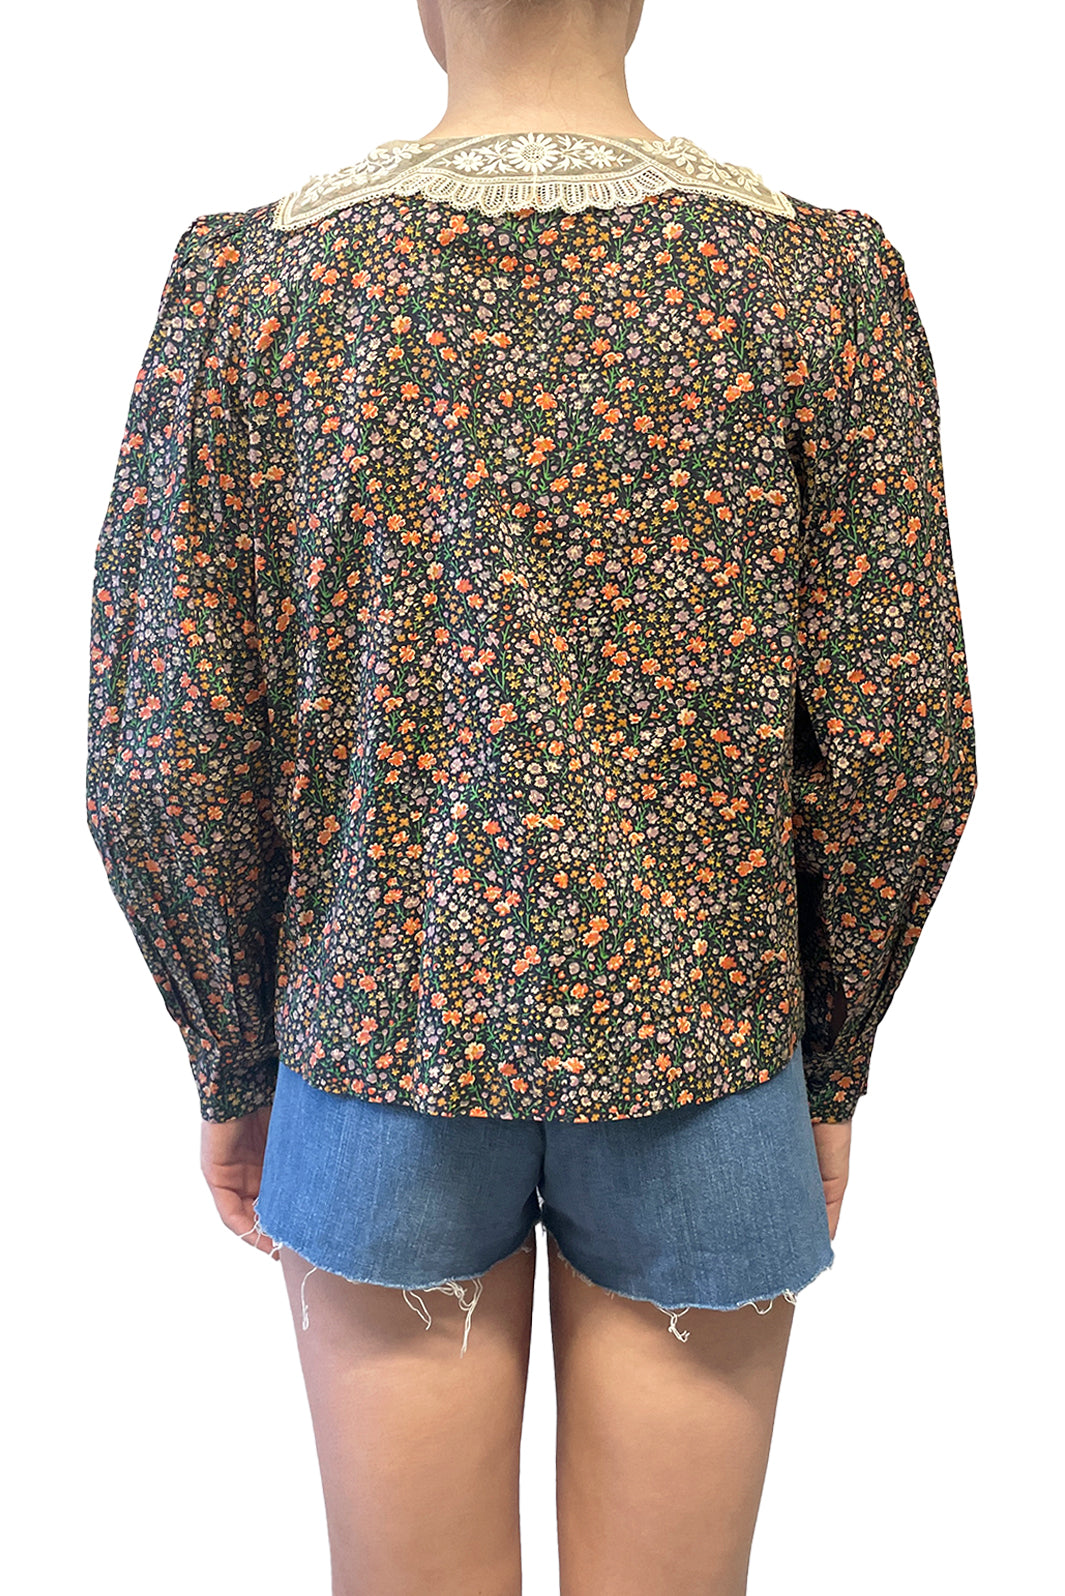 Vintage Lace Collared Floral Button Up Blouse